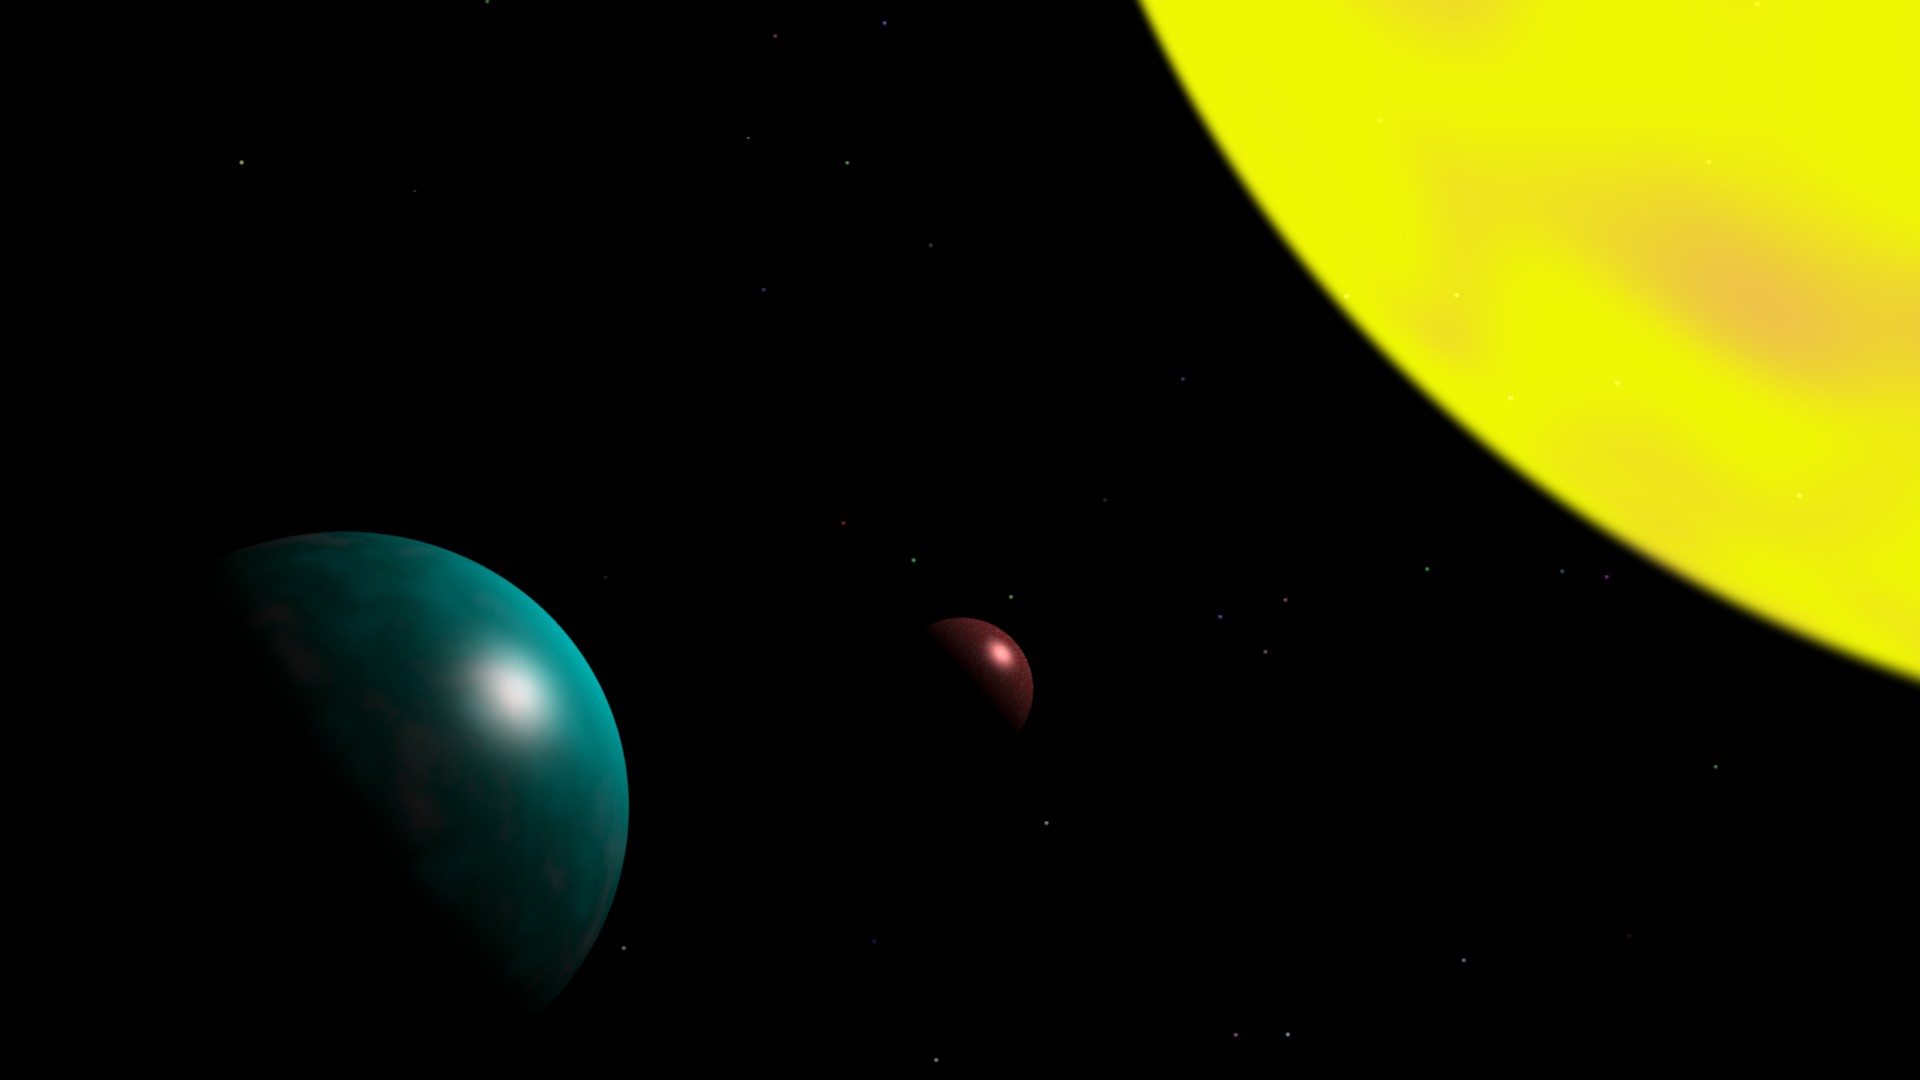 Solar System Moving Animation Pics About Space